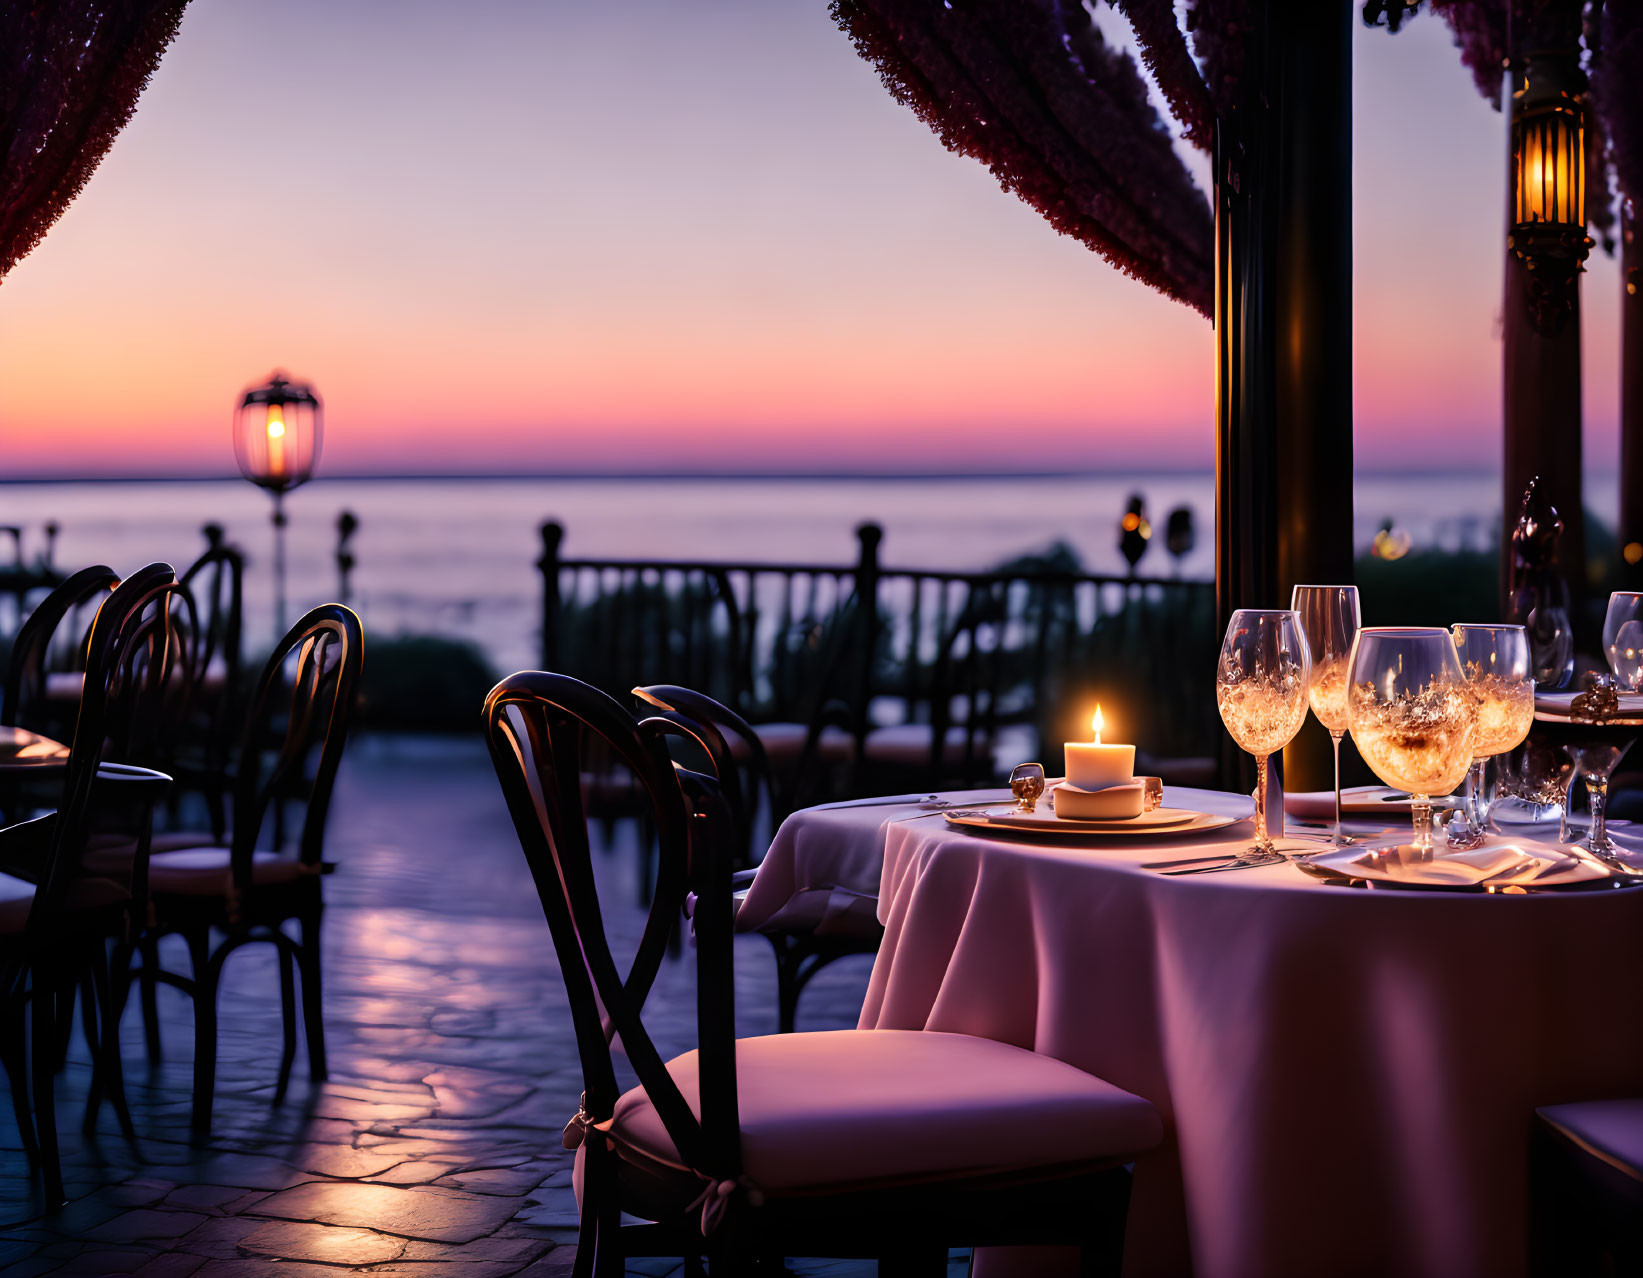 Romantic outdoor dining with candle, wine glasses, and ocean sunset view